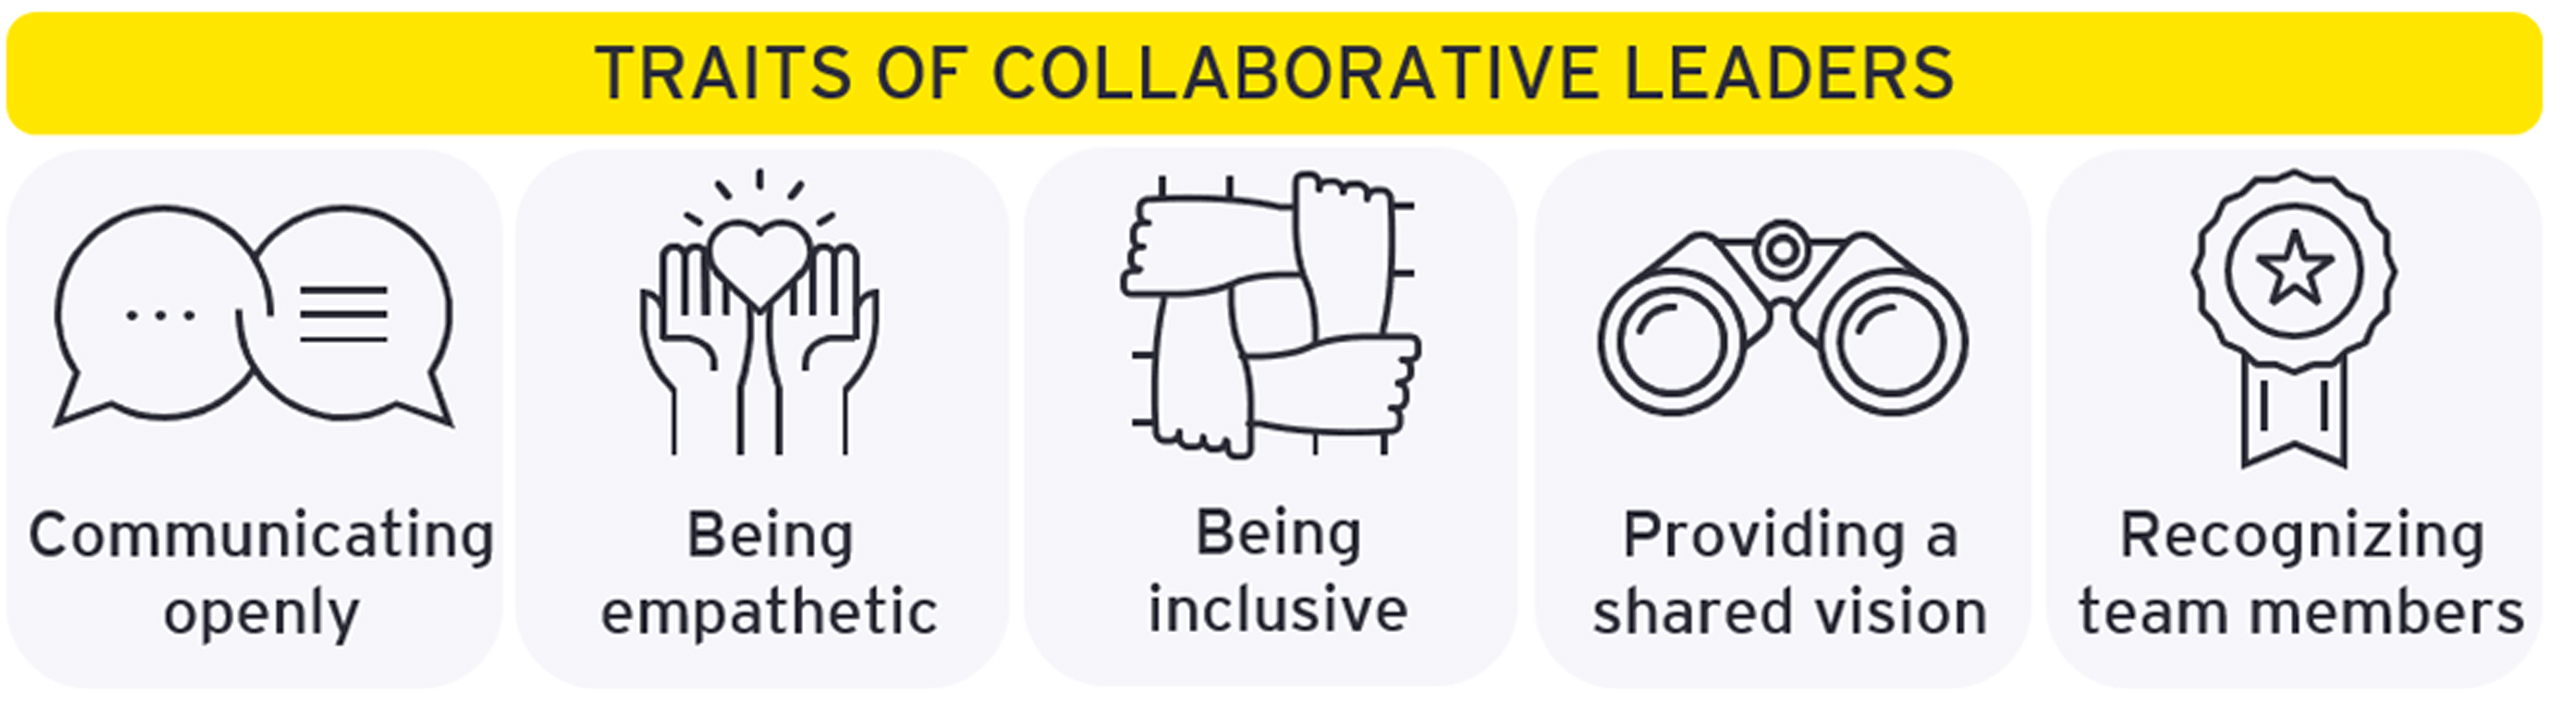 Traits of collaborative leaders